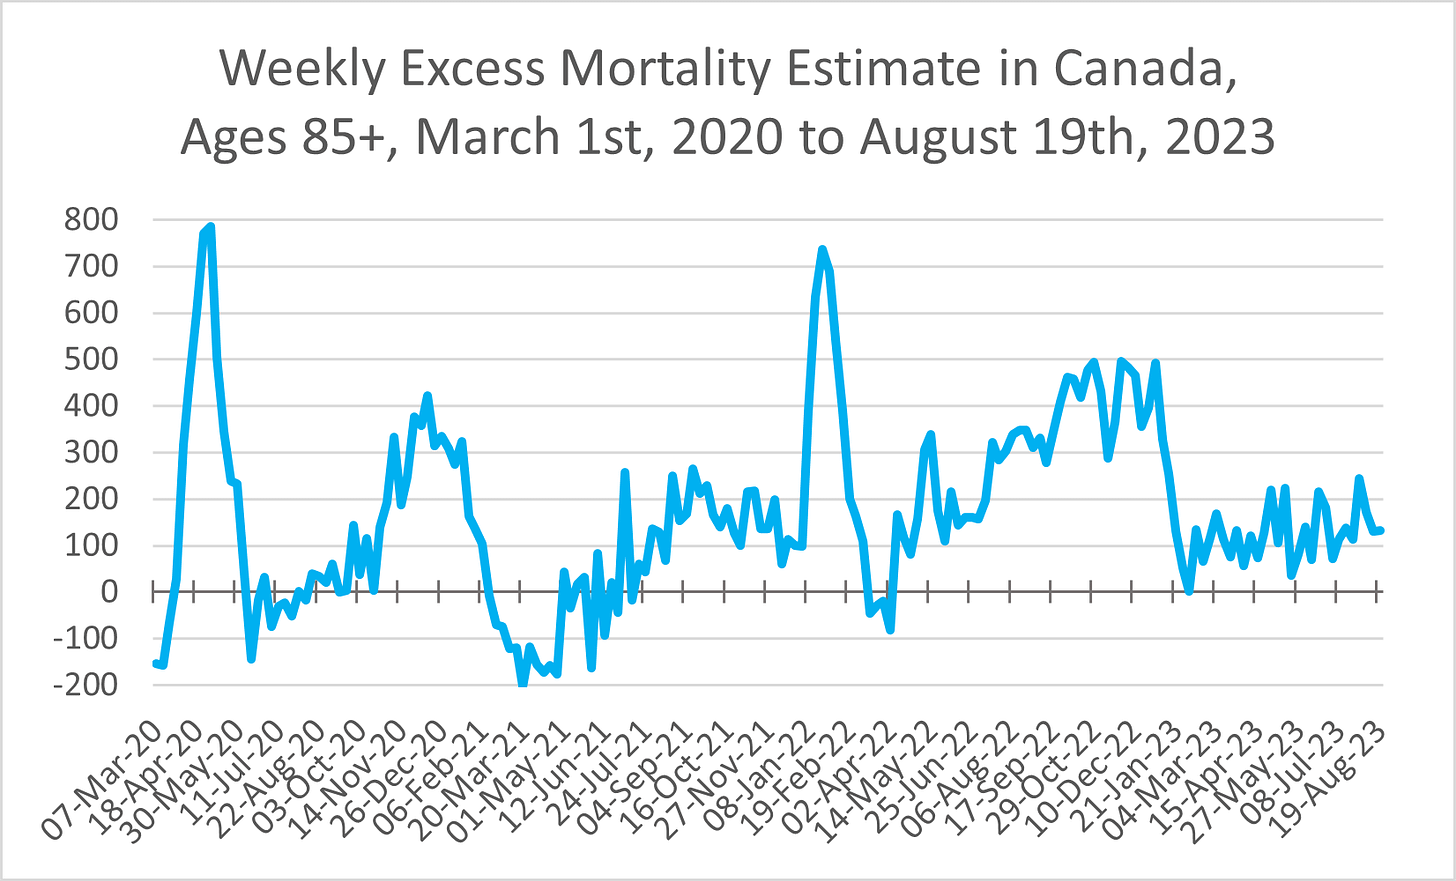 Line chart showing weekly excess mortality in Canada among those aged 85 and over from March 1st, 2020 to August 19th, 2023. The figure is above 0 for the most part (indicating more deaths than expected) aside from early March 2020, July 2020, March to May 2021, and March 2022. The highest points were 800 in April 2020, 700 in January 2022, and 500 from September to December 2022.